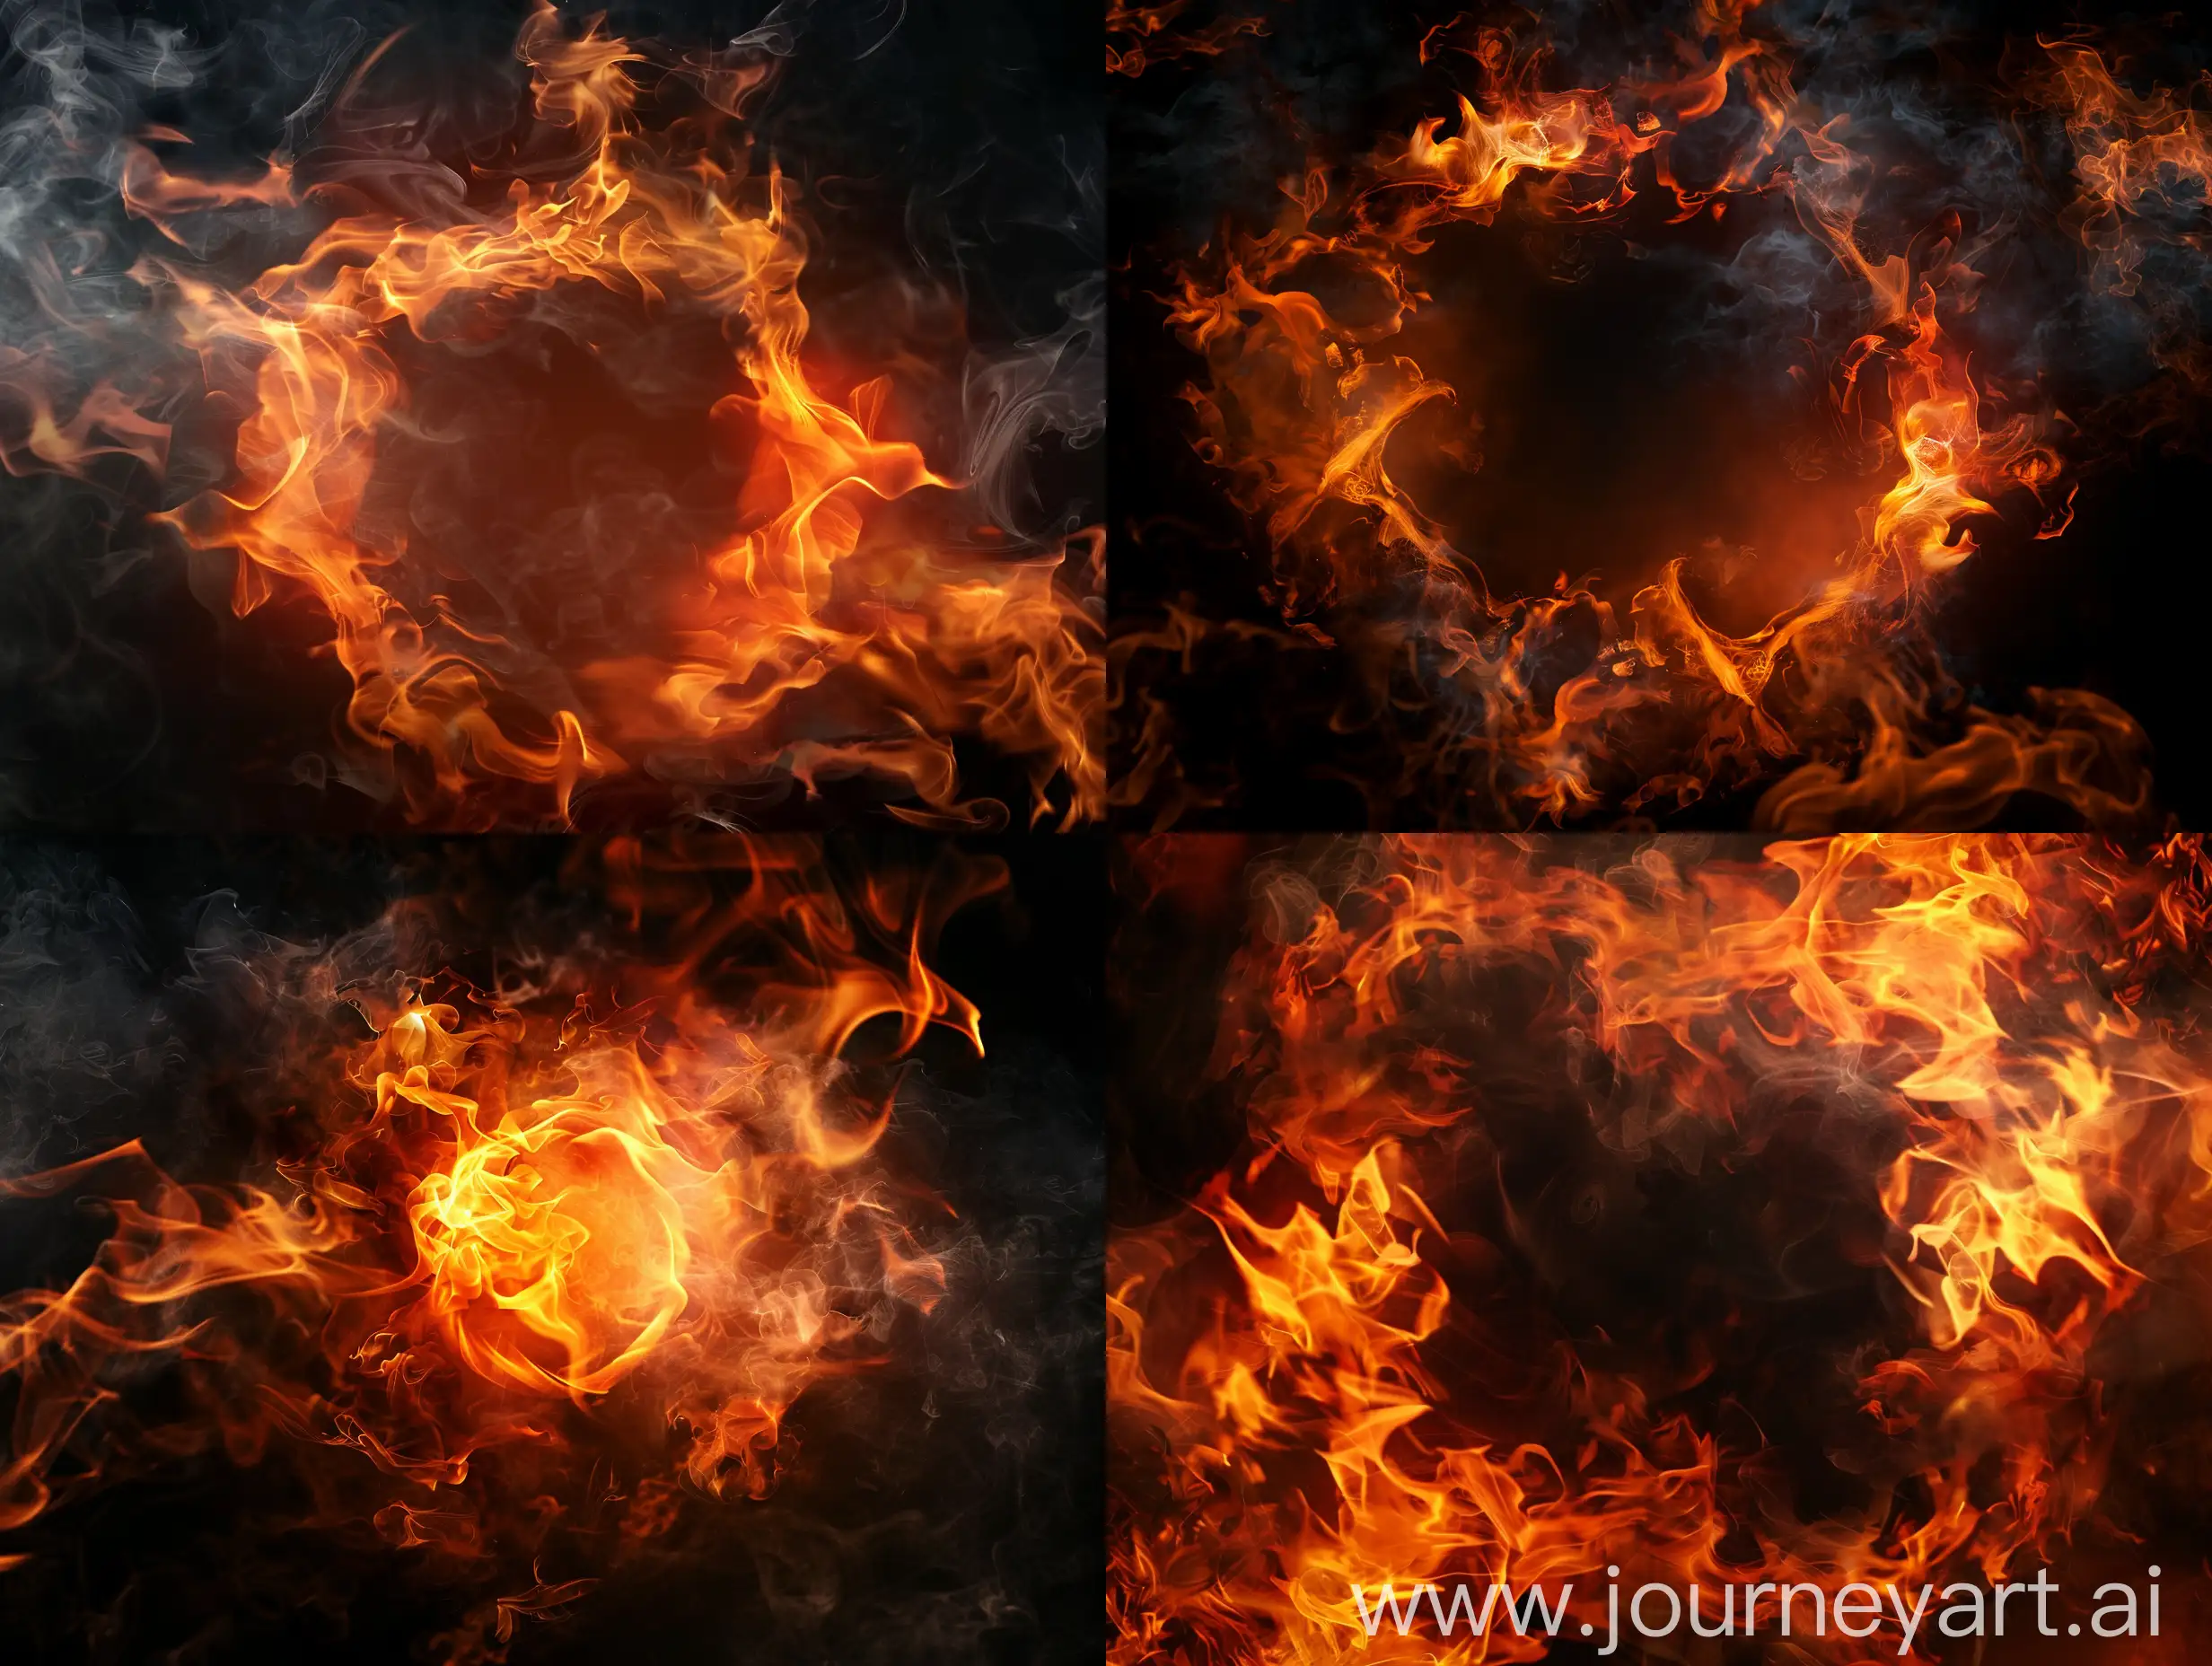 Ethereal-Fire-and-Dark-Smoke-Illuminating-a-Glowing-Center